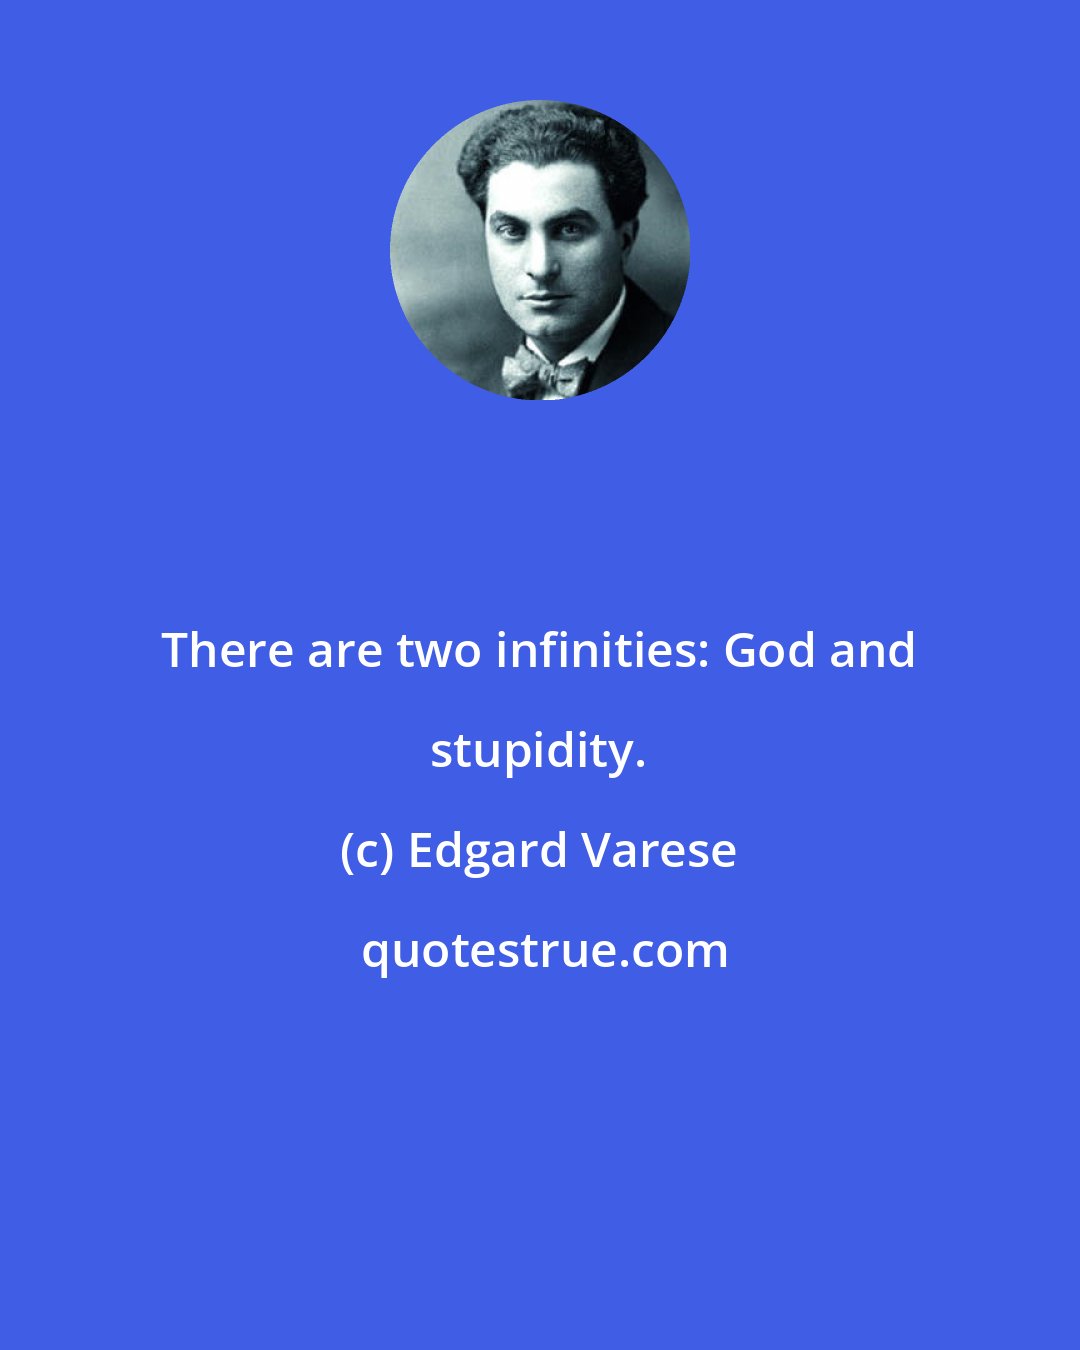 Edgard Varese: There are two infinities: God and stupidity.